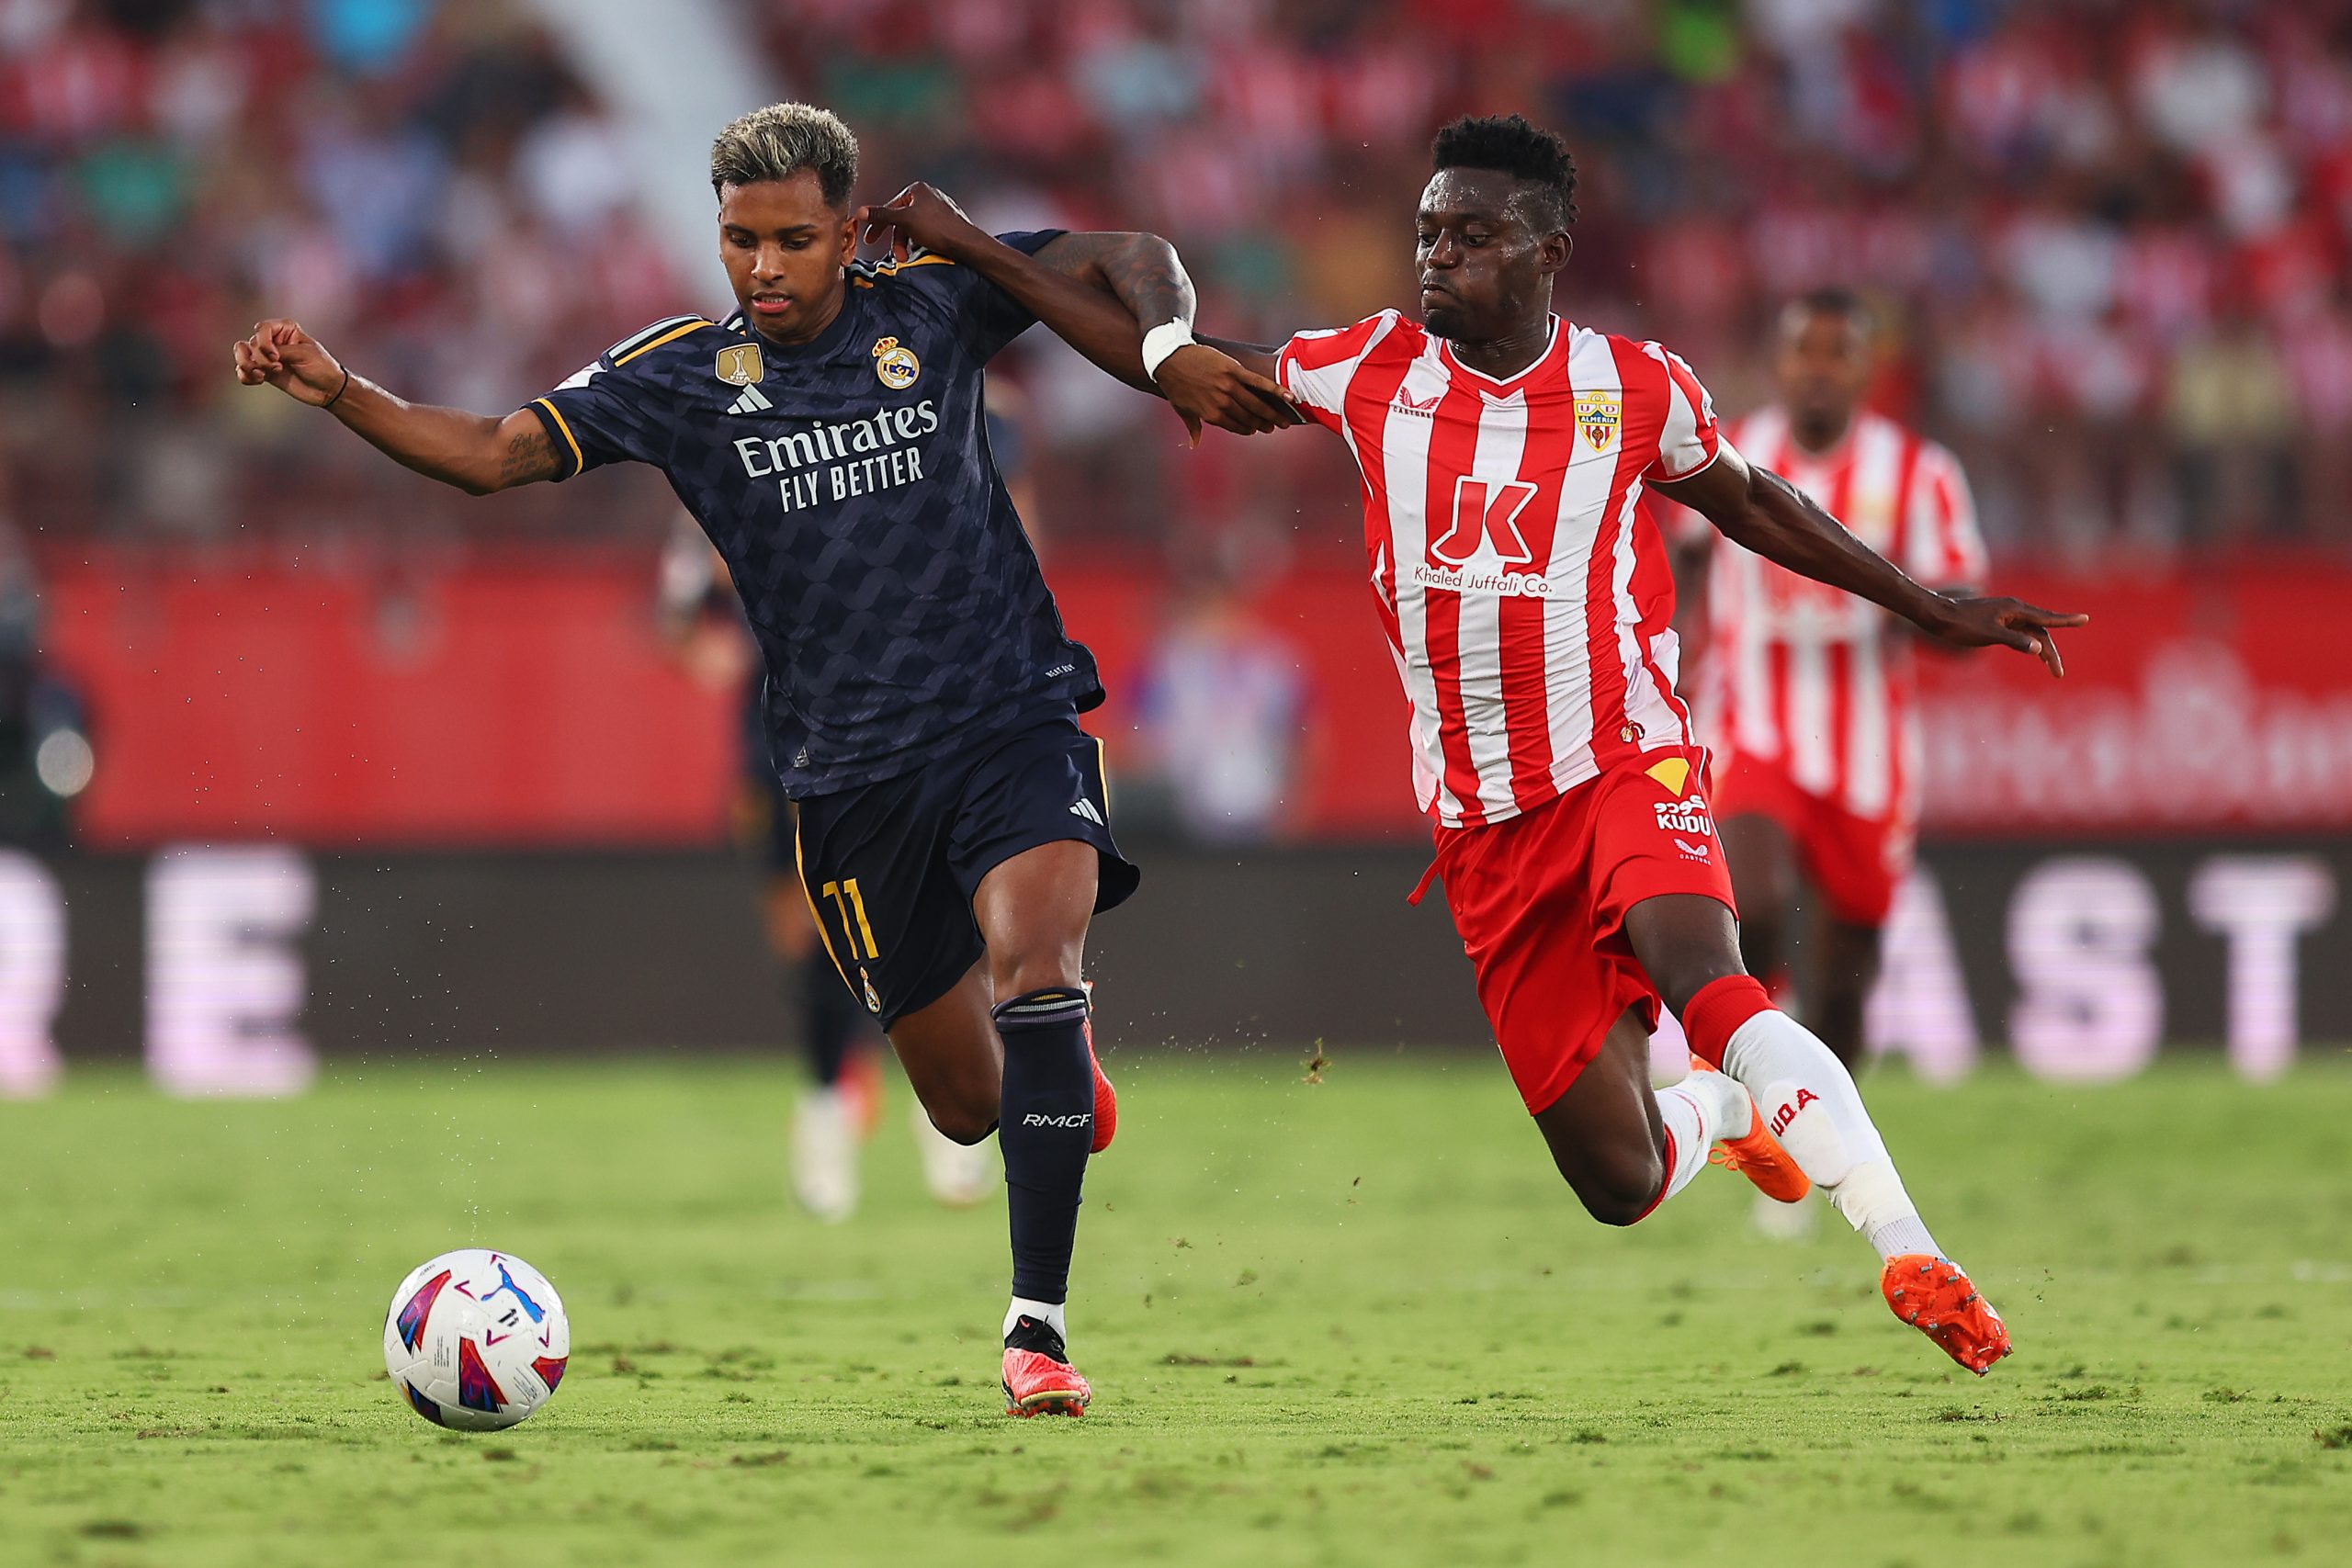 ALMERIA, SPAIN - AUGUST 19: Rodrygo of Real Madrid battles for possession with Iddrisu Baba of UD Almeria during the LaLiga EA Sports match between UD Almeria and Real Madrid CF at Juegos Mediterraneos on August 19, 2023 in Almeria, Spain. (Photo by Fran Santiago/Getty Images)